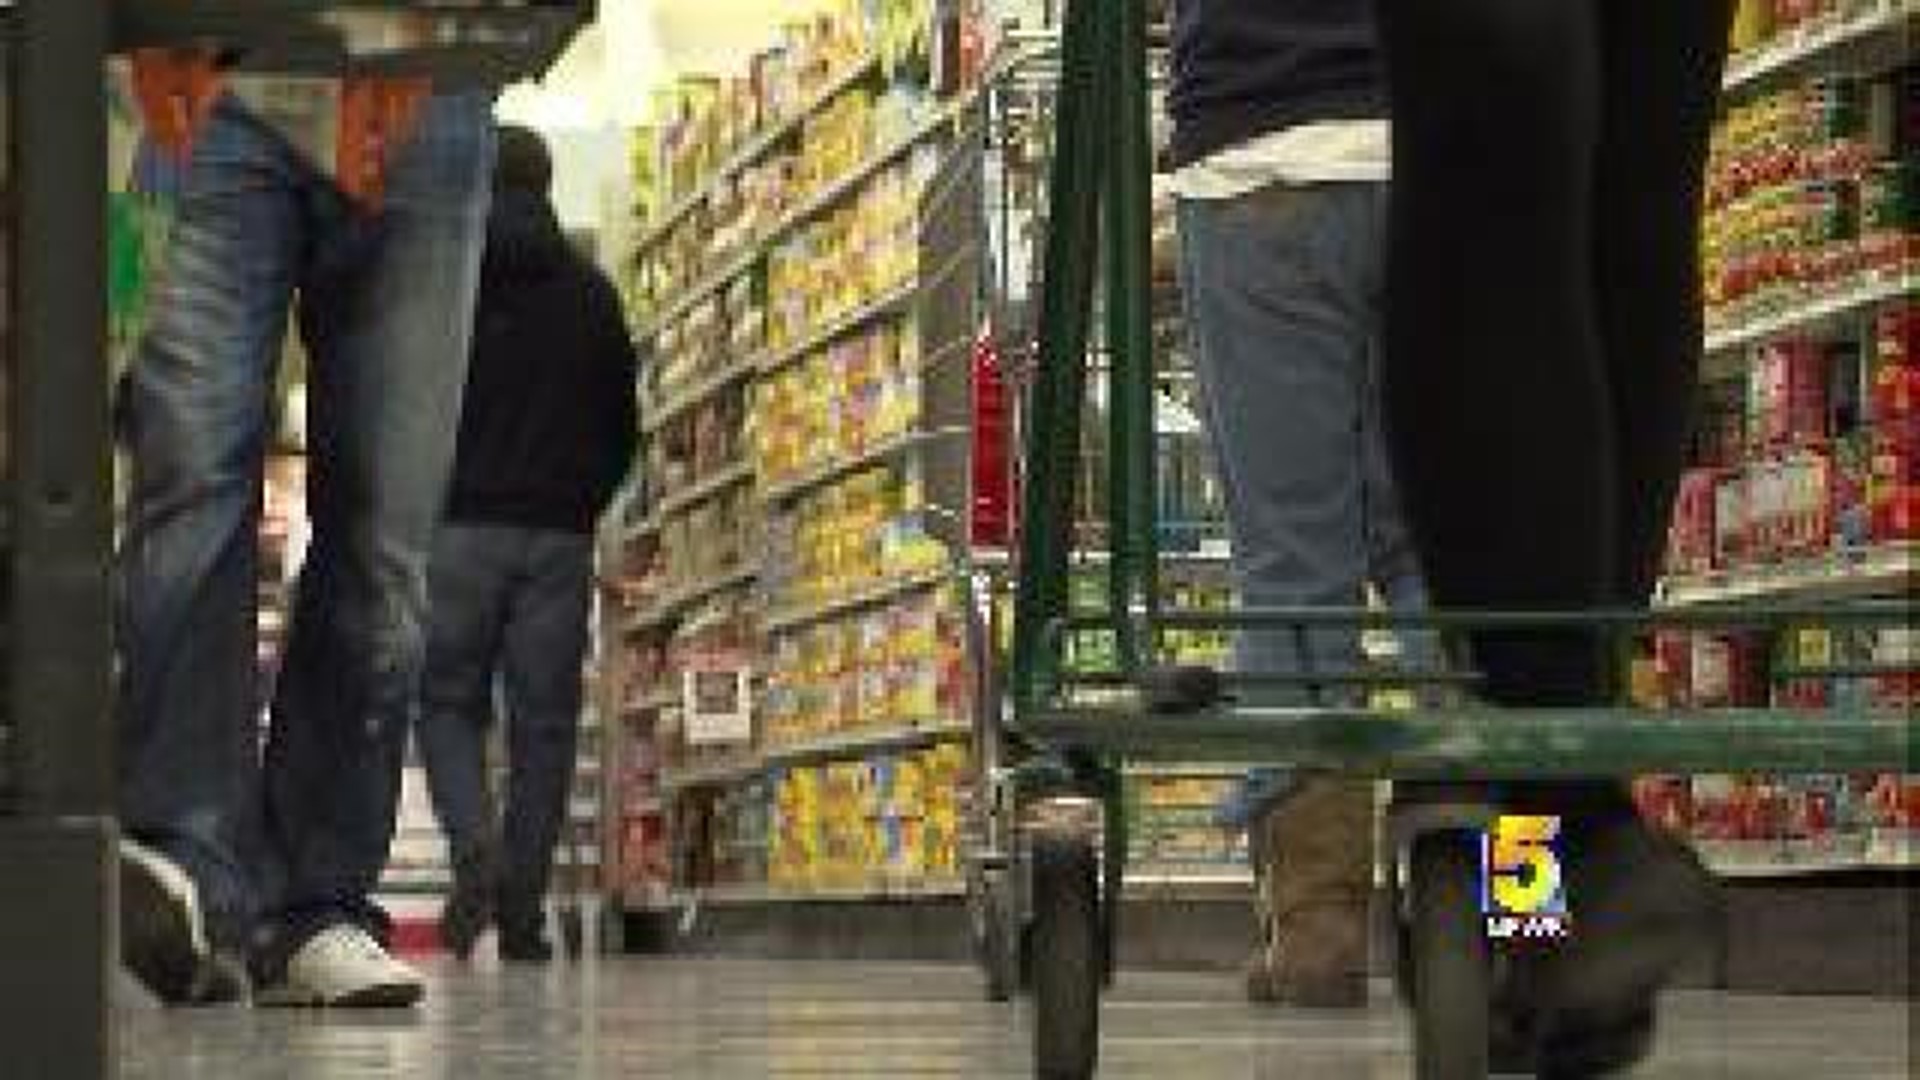 Drought In 2012 Causes High Food Costs In 2014